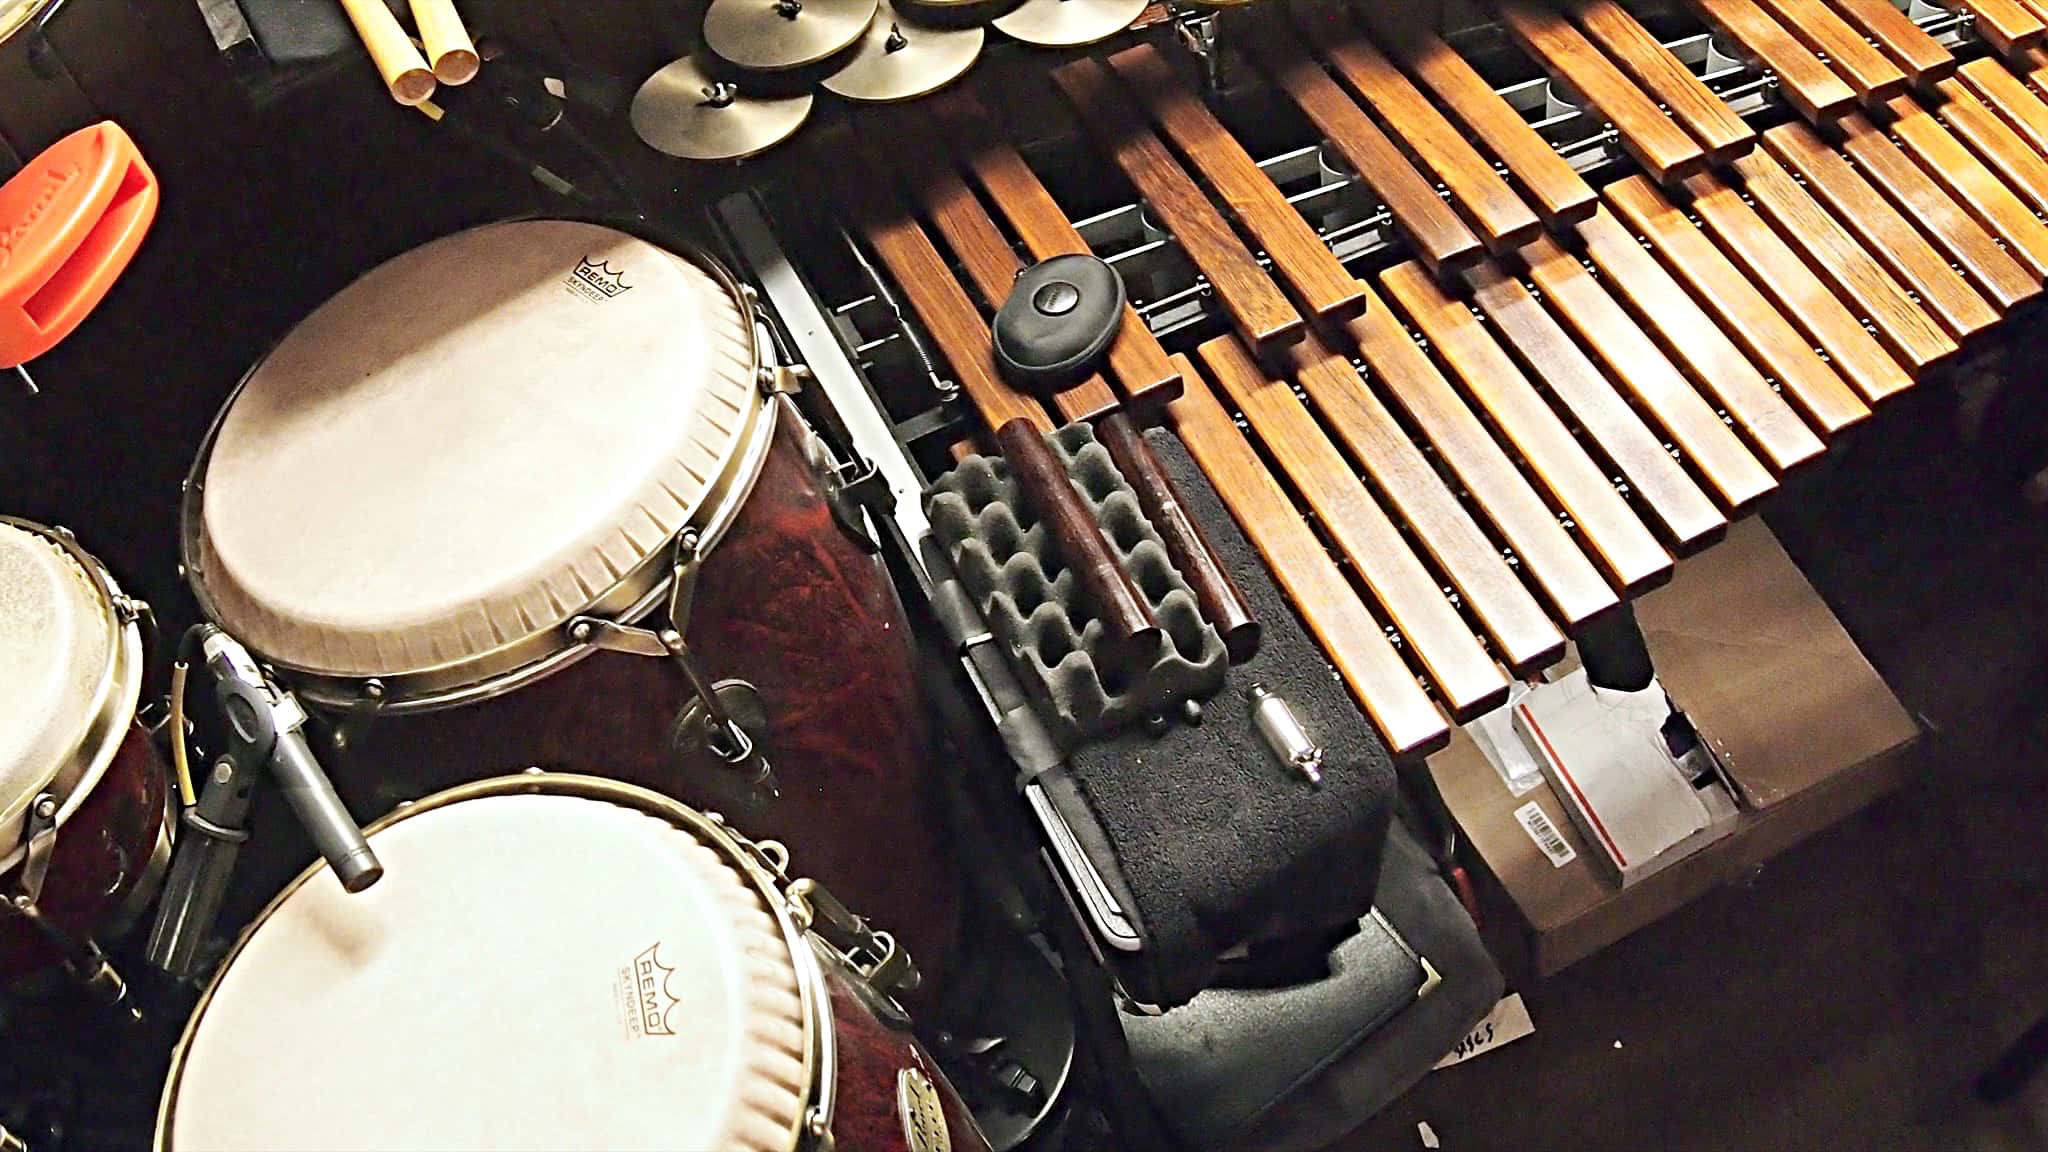 Sean Ritenauer's percussion setup for the Broadway revival of Pippin at the Music Box Theatre.